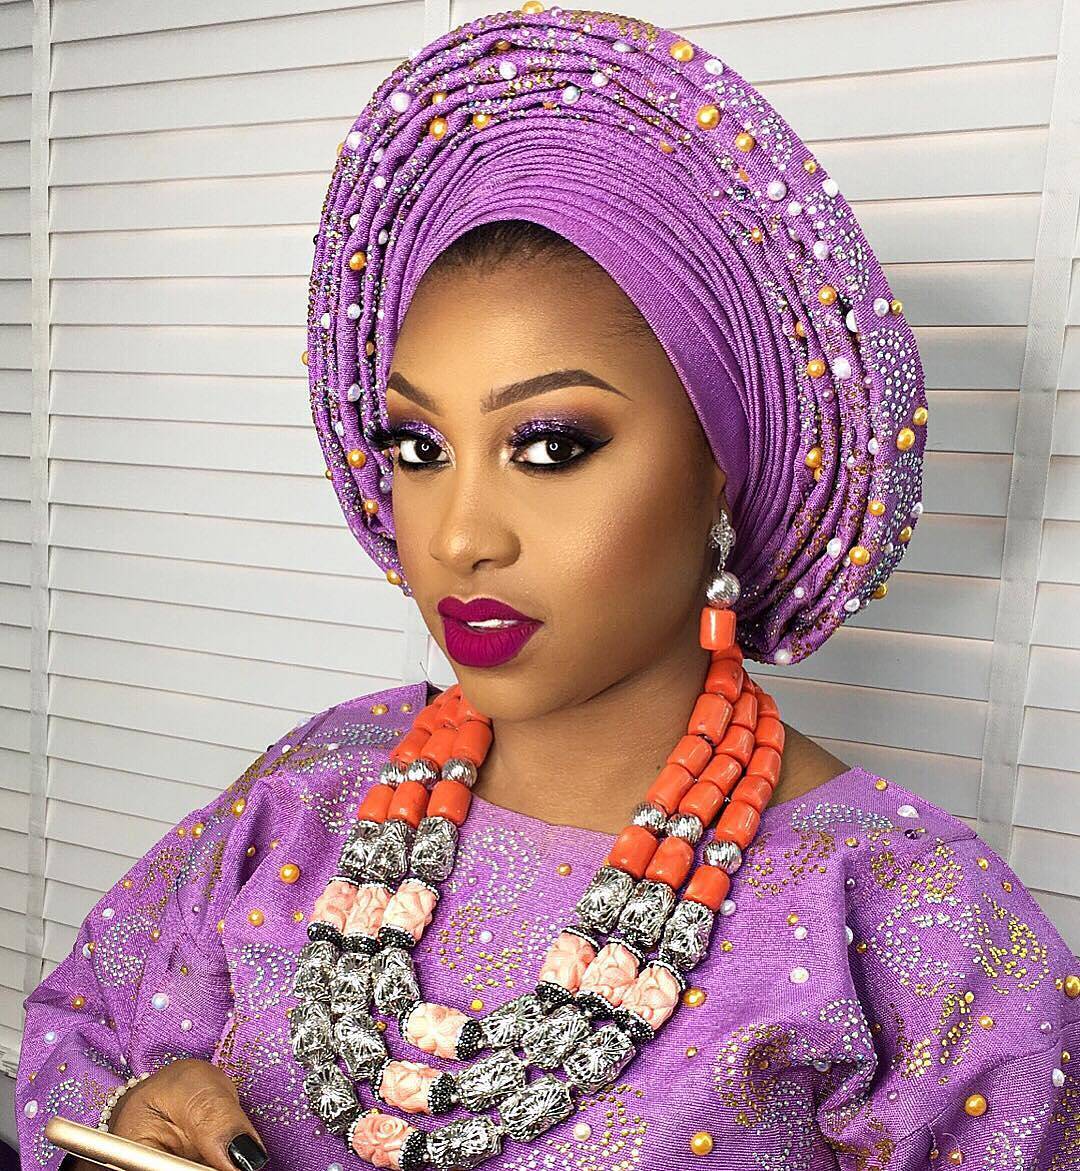 Makeup and gele 13 - FabWoman | News, Celebrity, Beauty, Style, Money ...